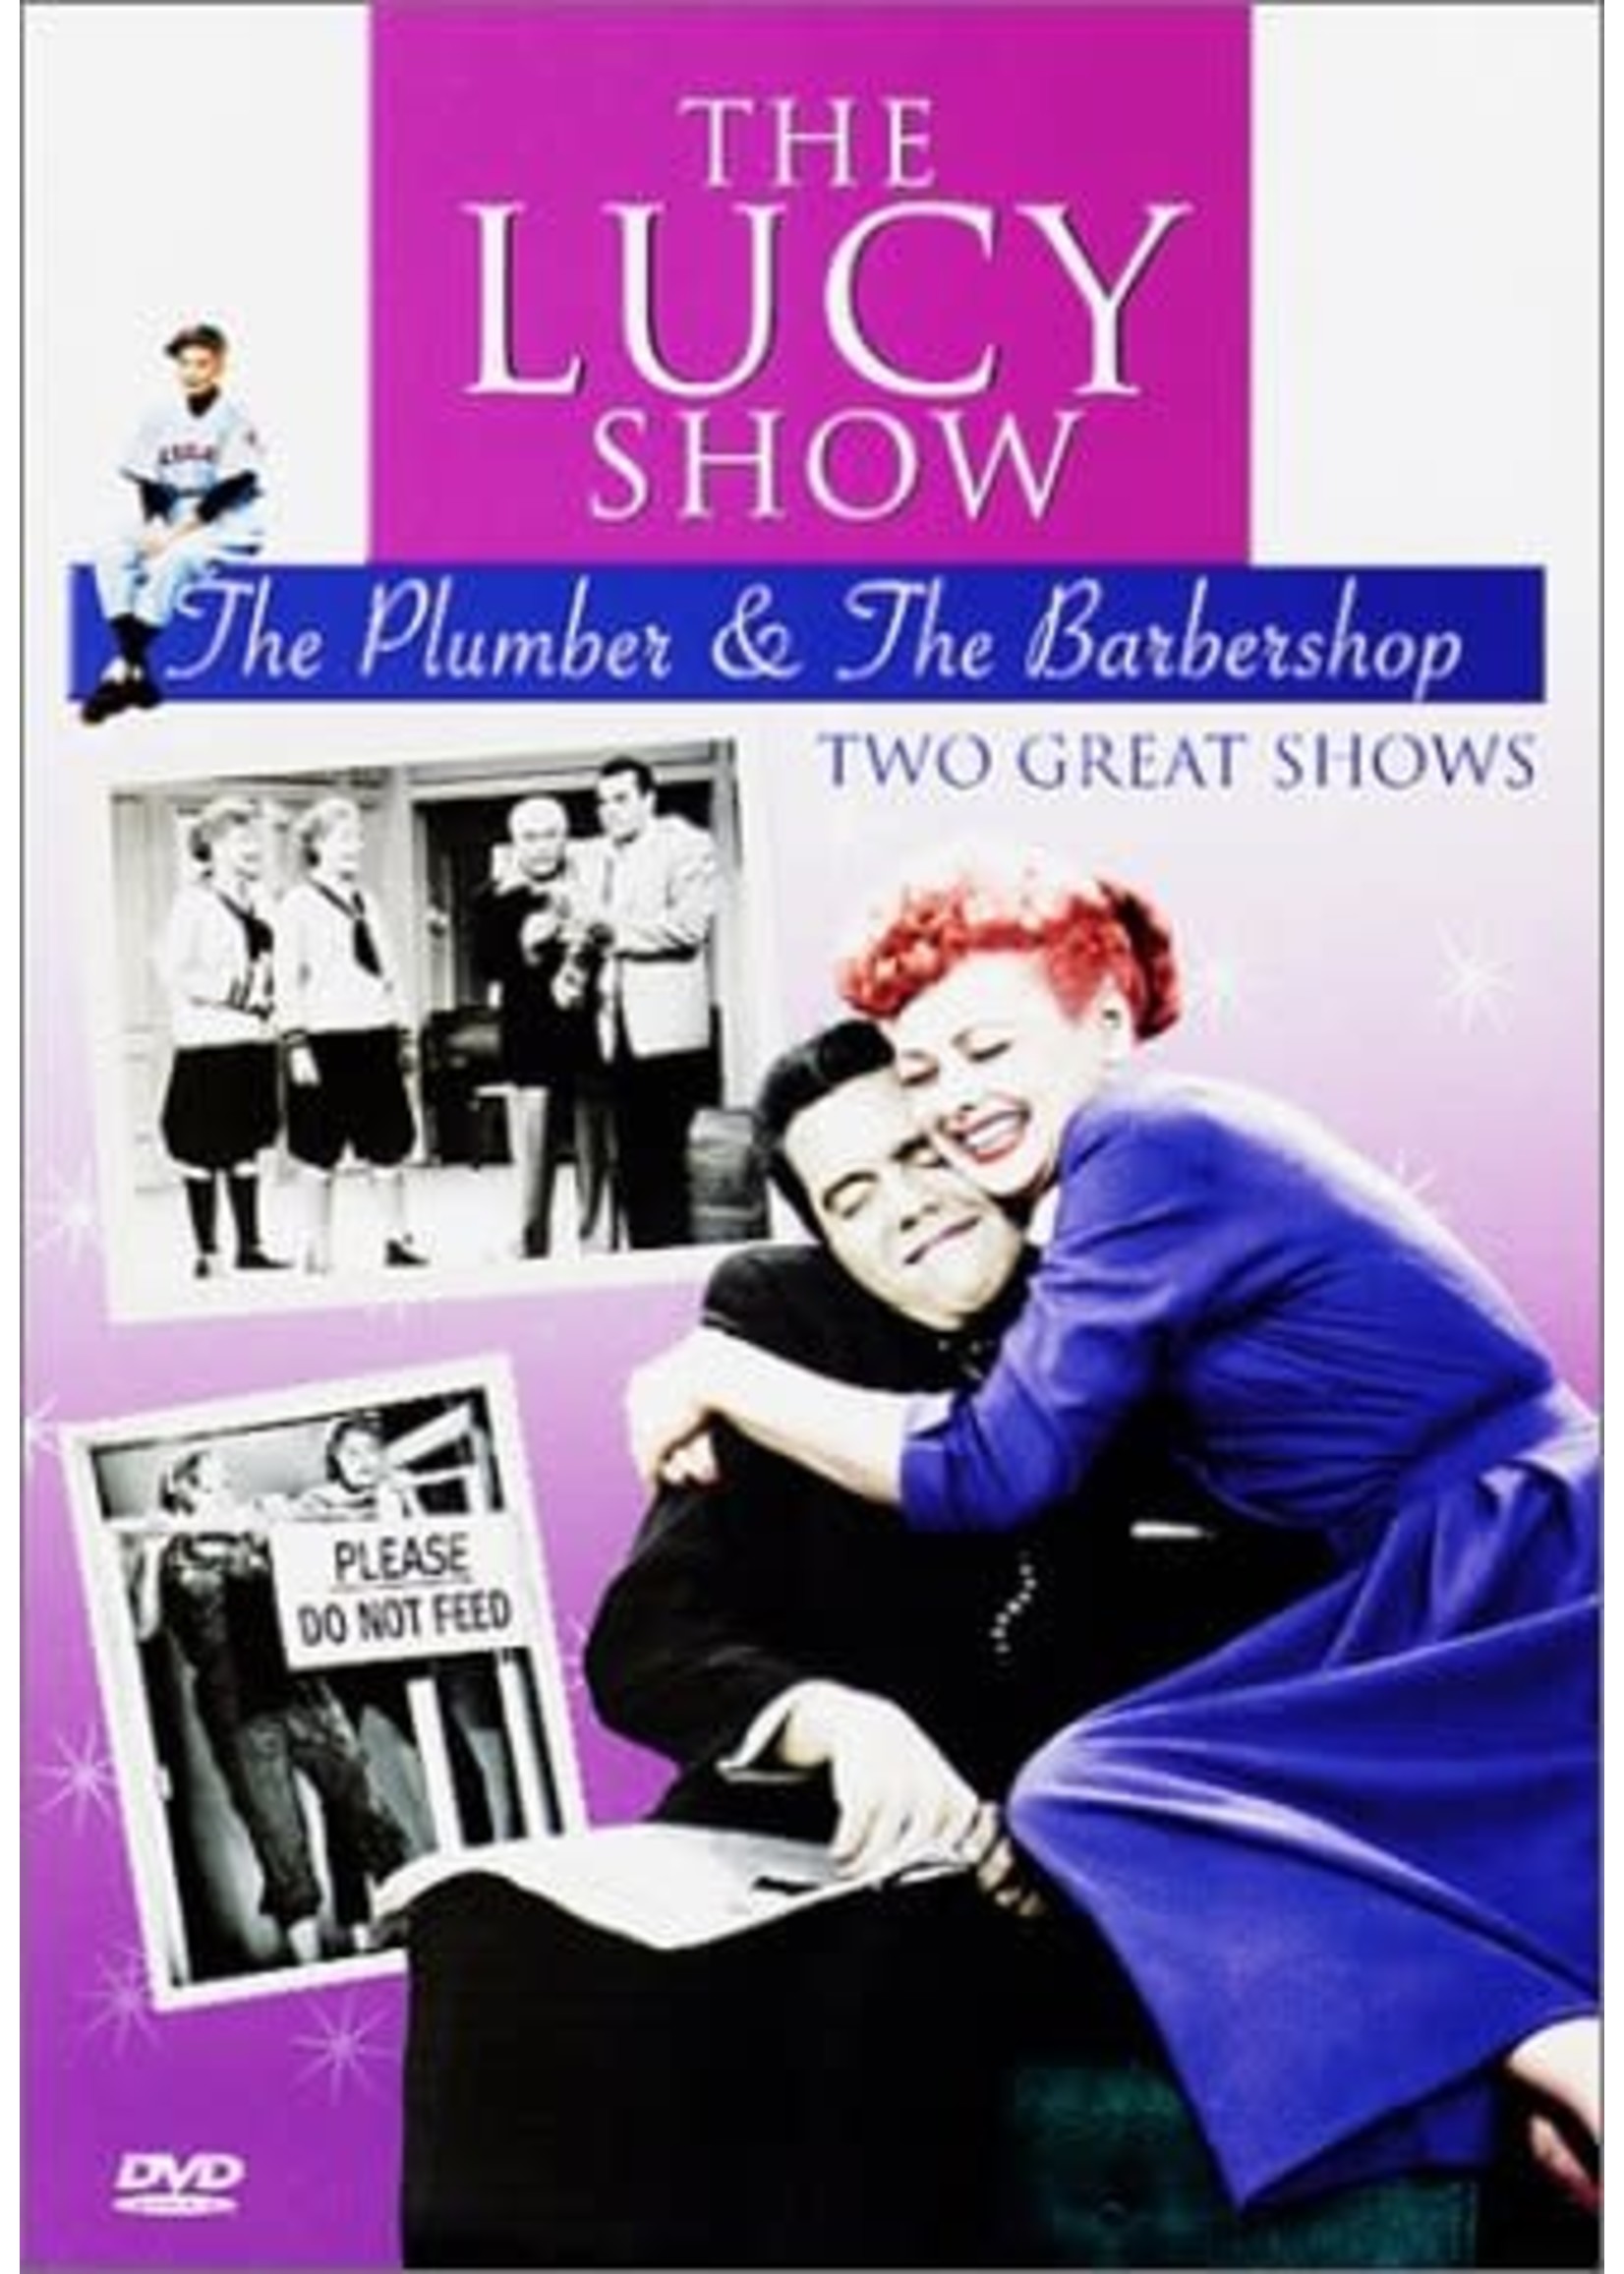 The Lucy Show - the Plumber & the Barbershop